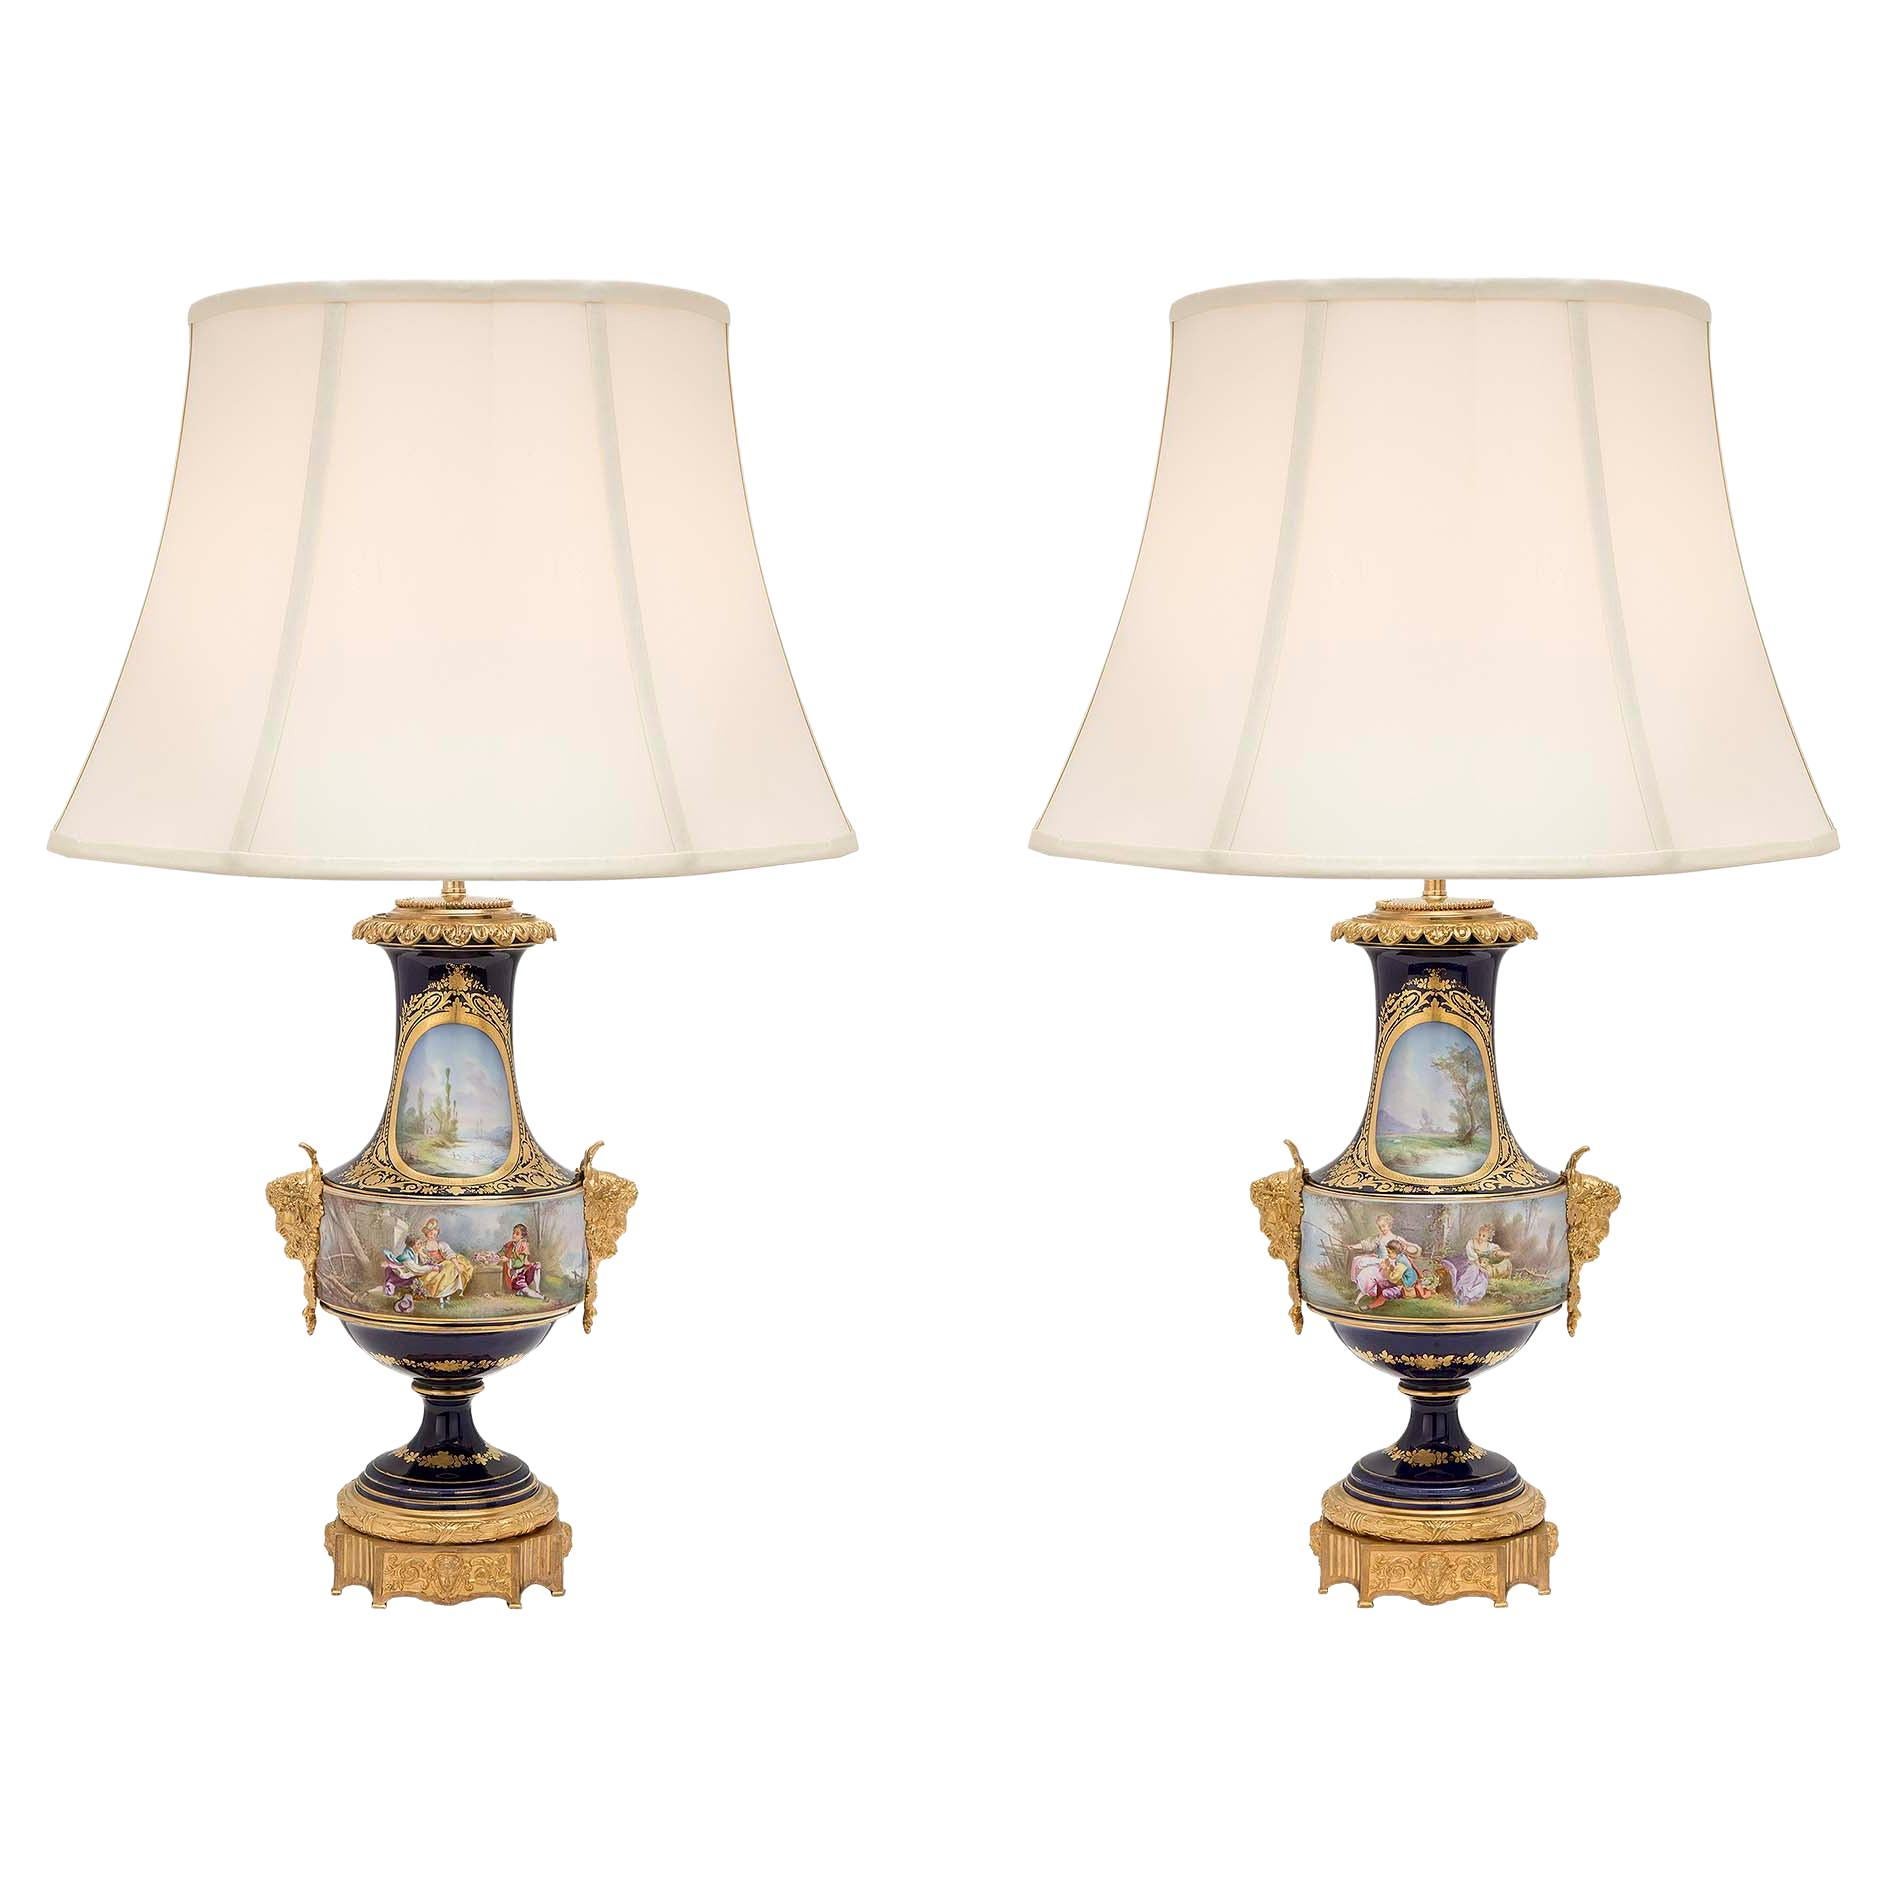 Pair of French 19th Century Louis XVI St. Sèvres Porcelain and Ormolu Lamps For Sale